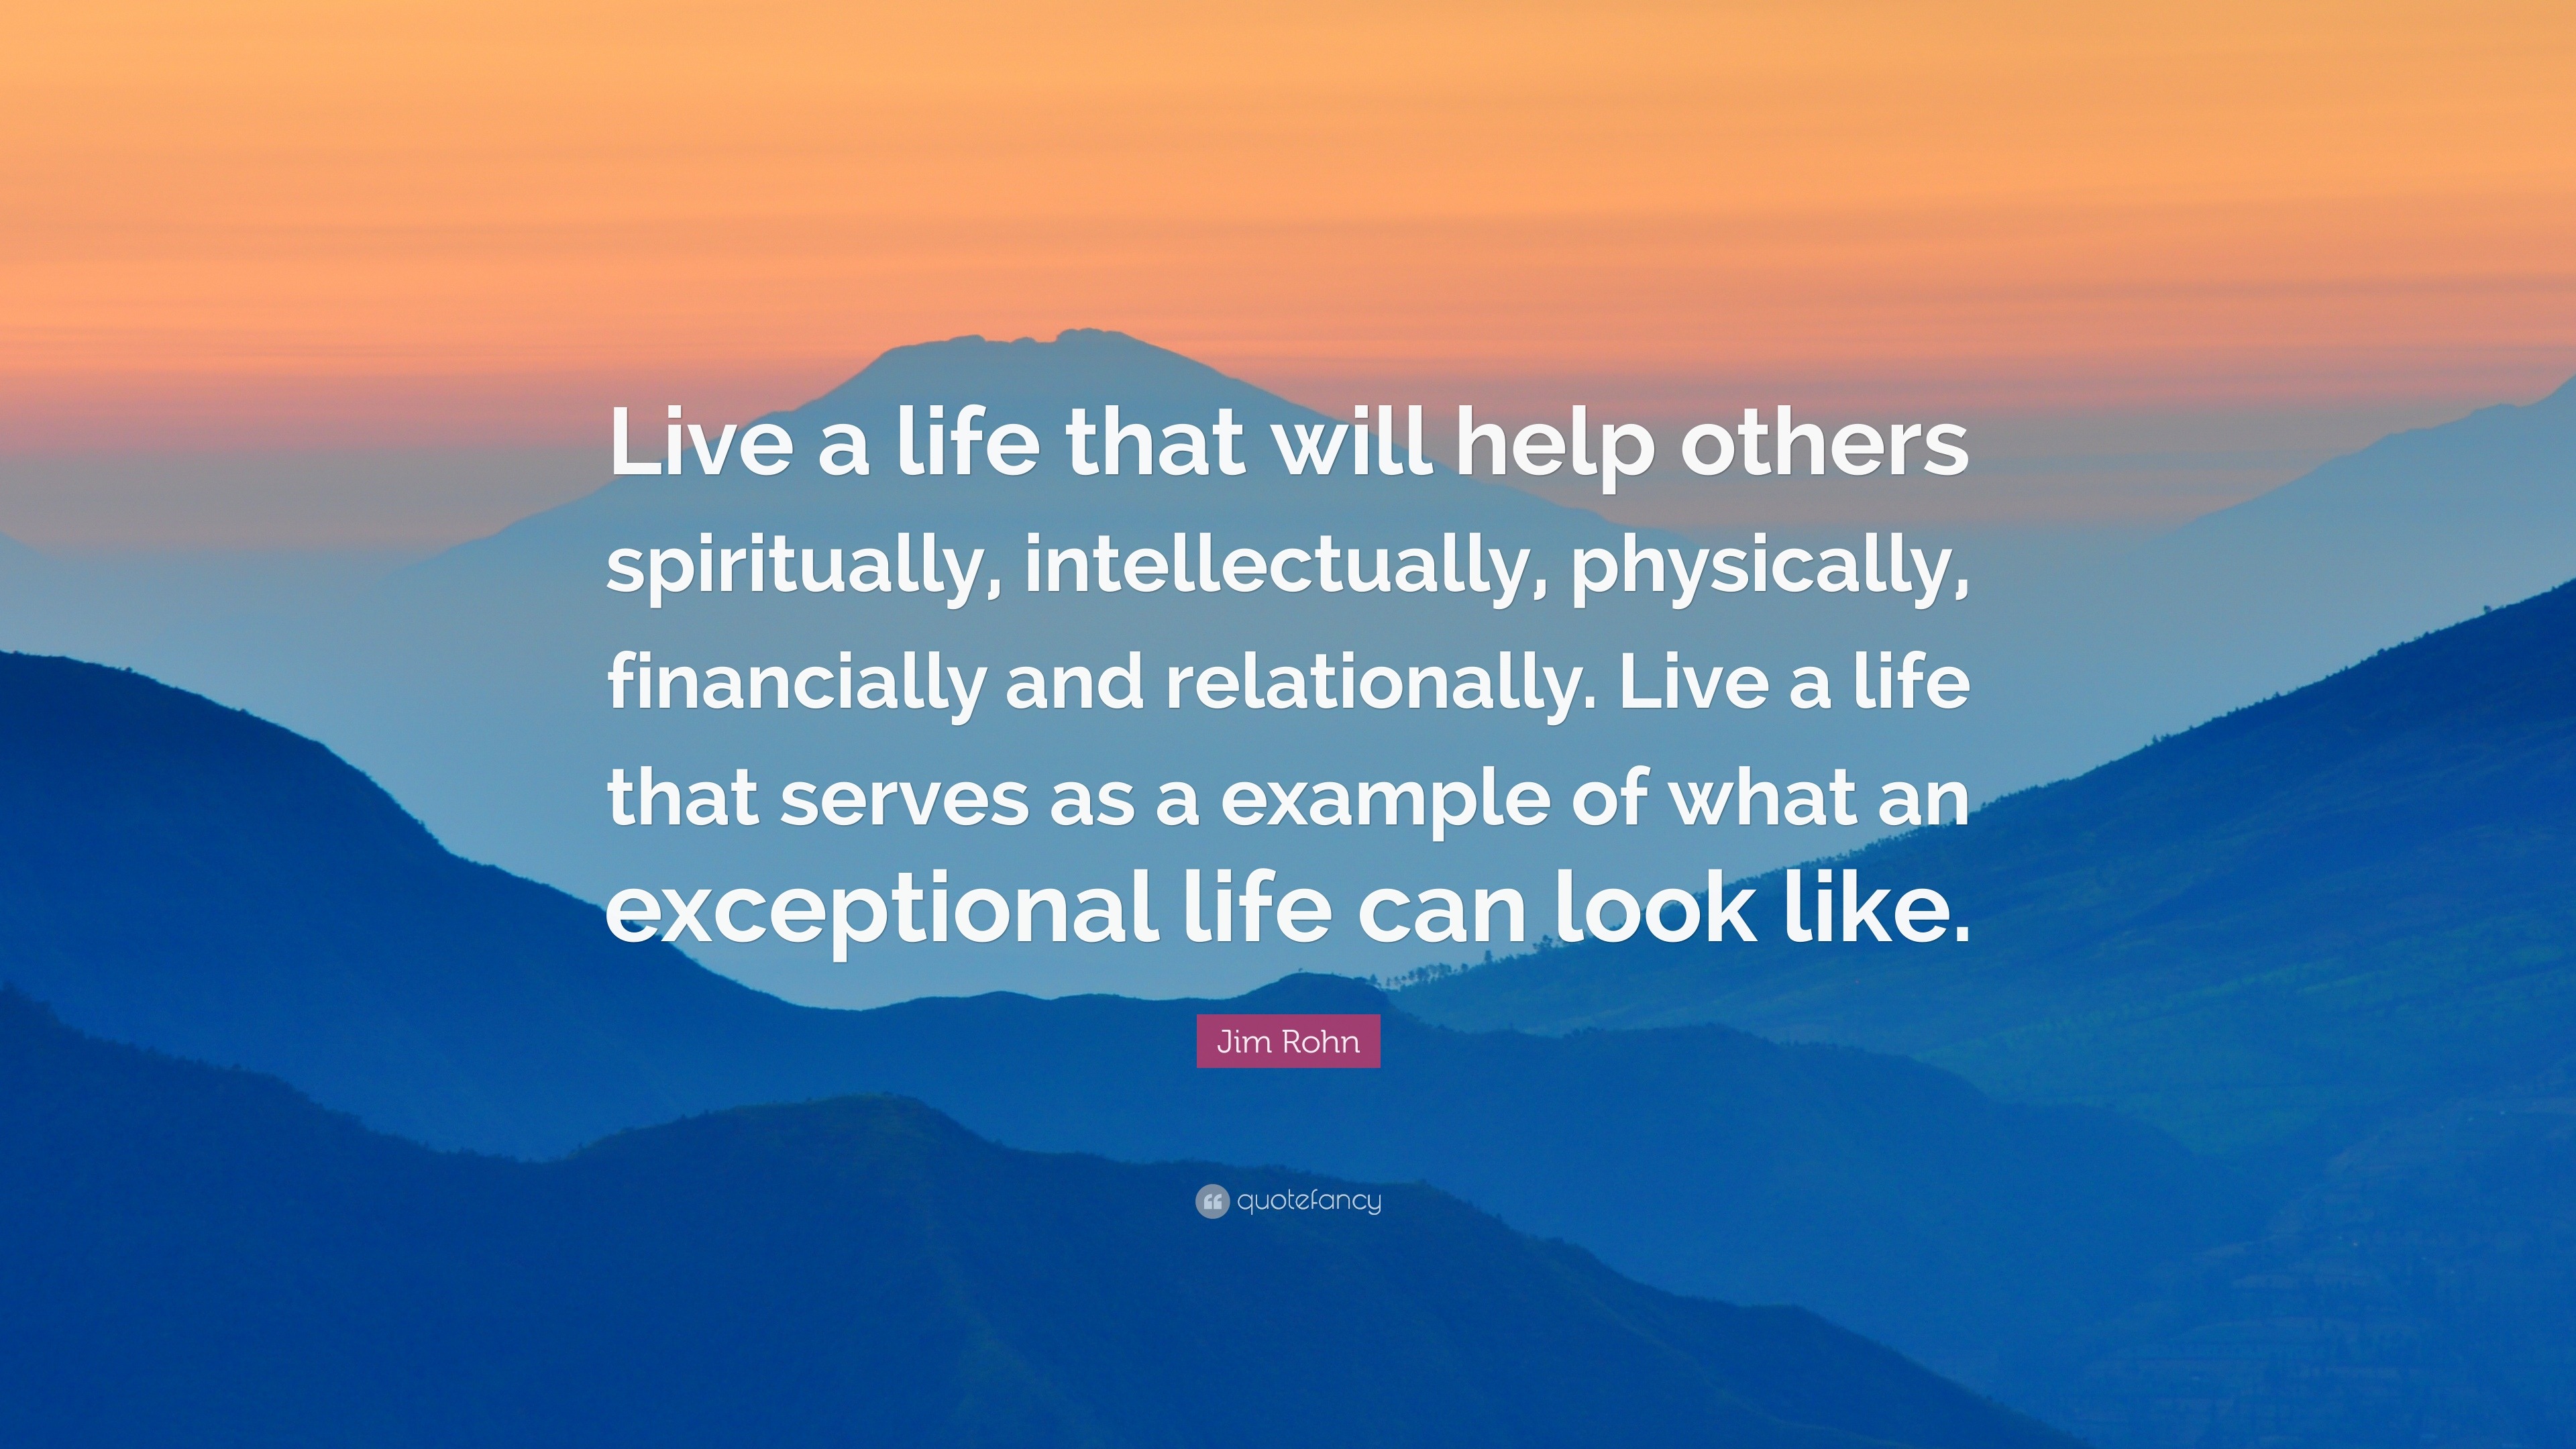 Jim Rohn Quote “Live a life that will help others spiritually intellectually